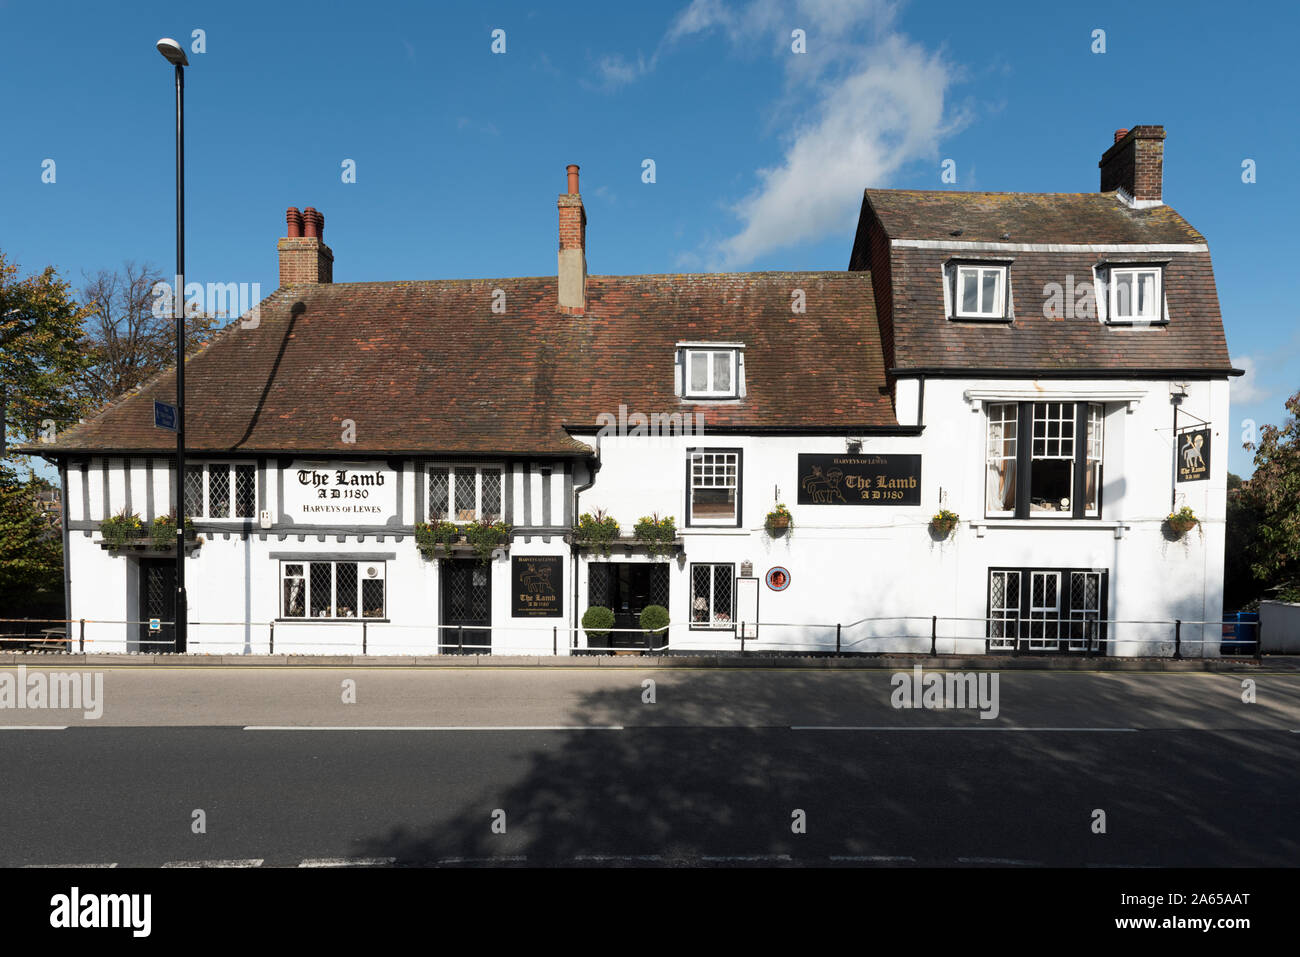 The Lamb, public house or inn in Eastbourne, East Sussex, England, United Kingdom Stock Photo